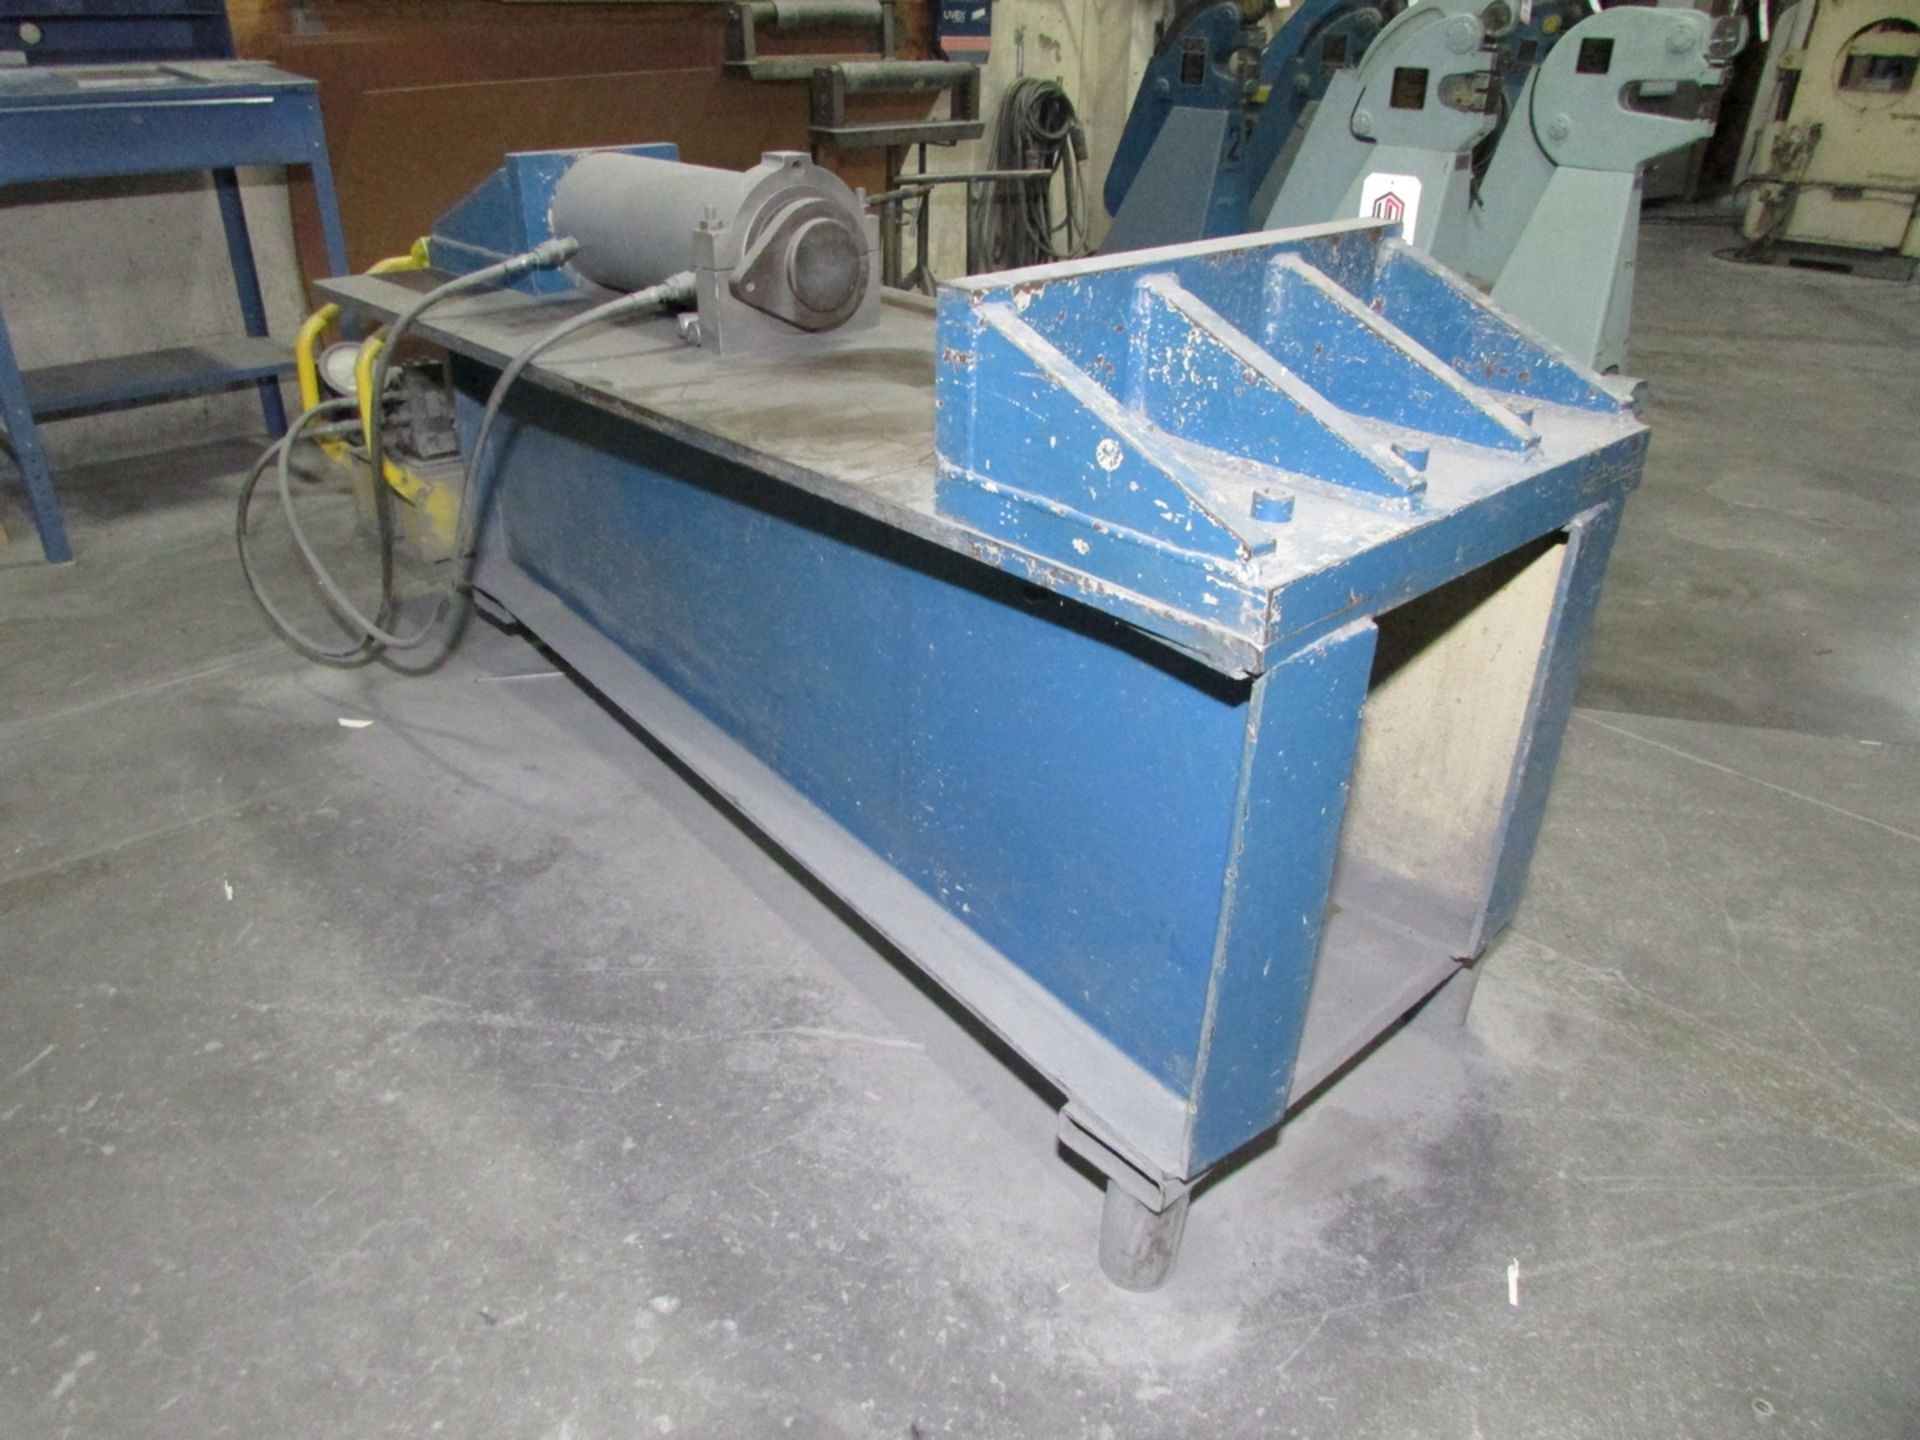 HORIZONTAL HYDRAULIC STRAIGHTENING PRESS, 30" X 9" ANGLE PLATE, 80" X 30" TABLE, ENERPAC GPER5320J - Image 11 of 12